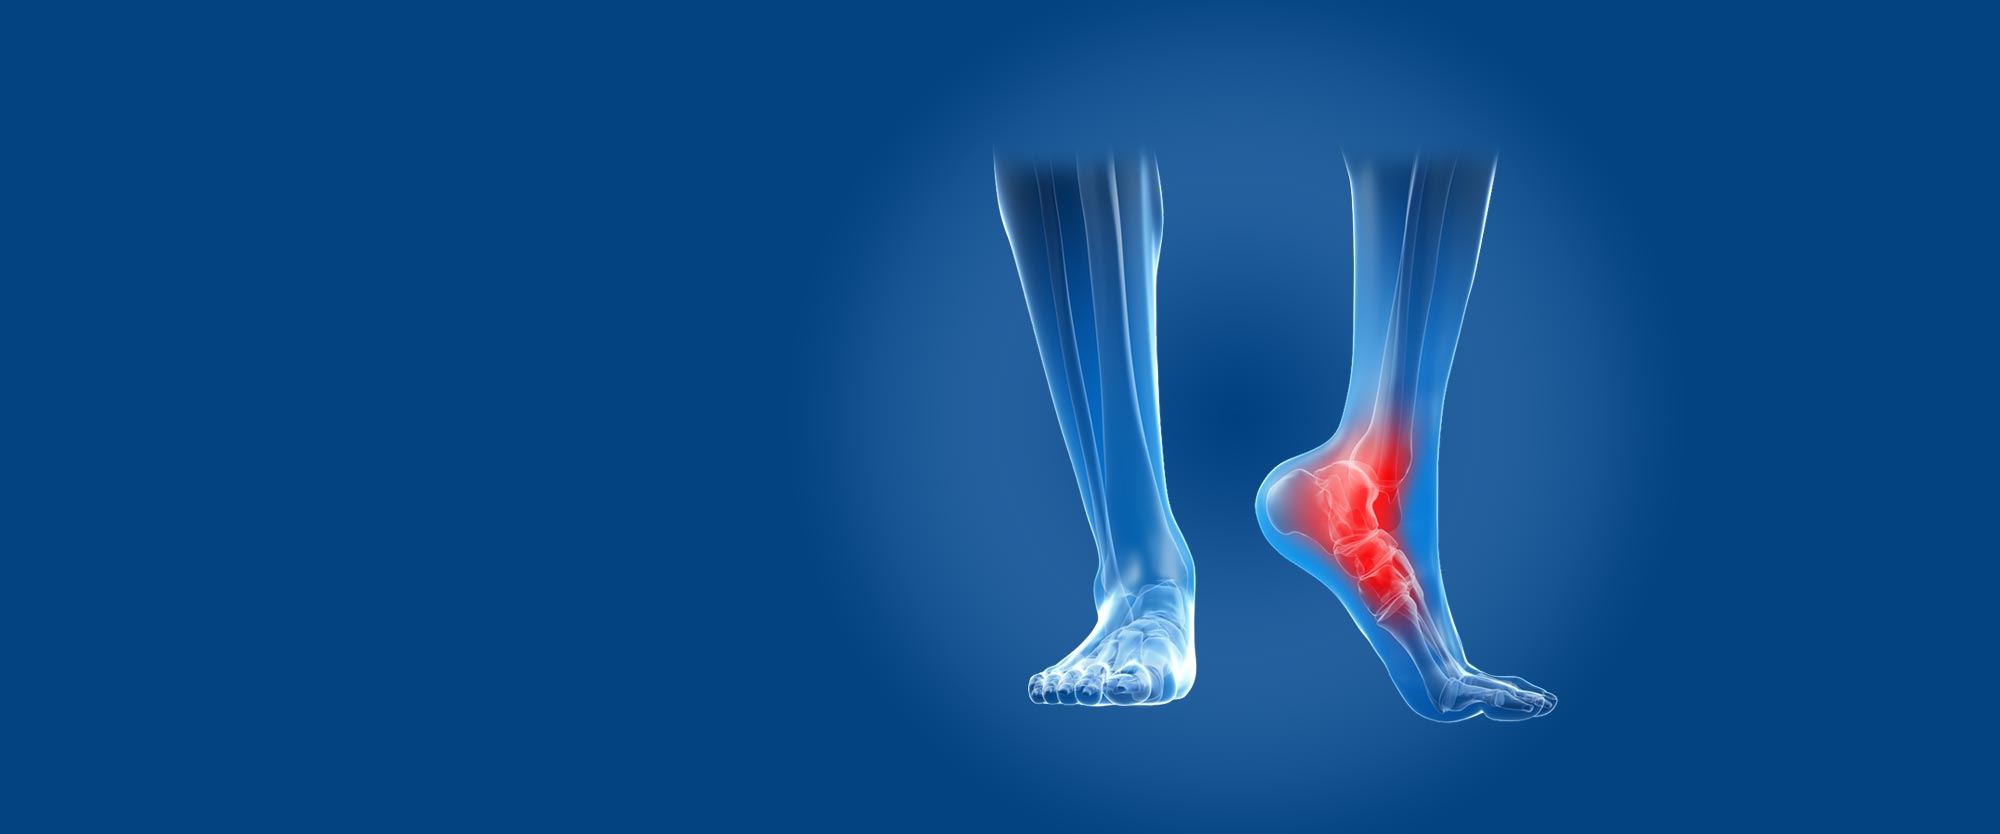 3D rendering of a person's lower leg and feed bones with the heel bones highlighted